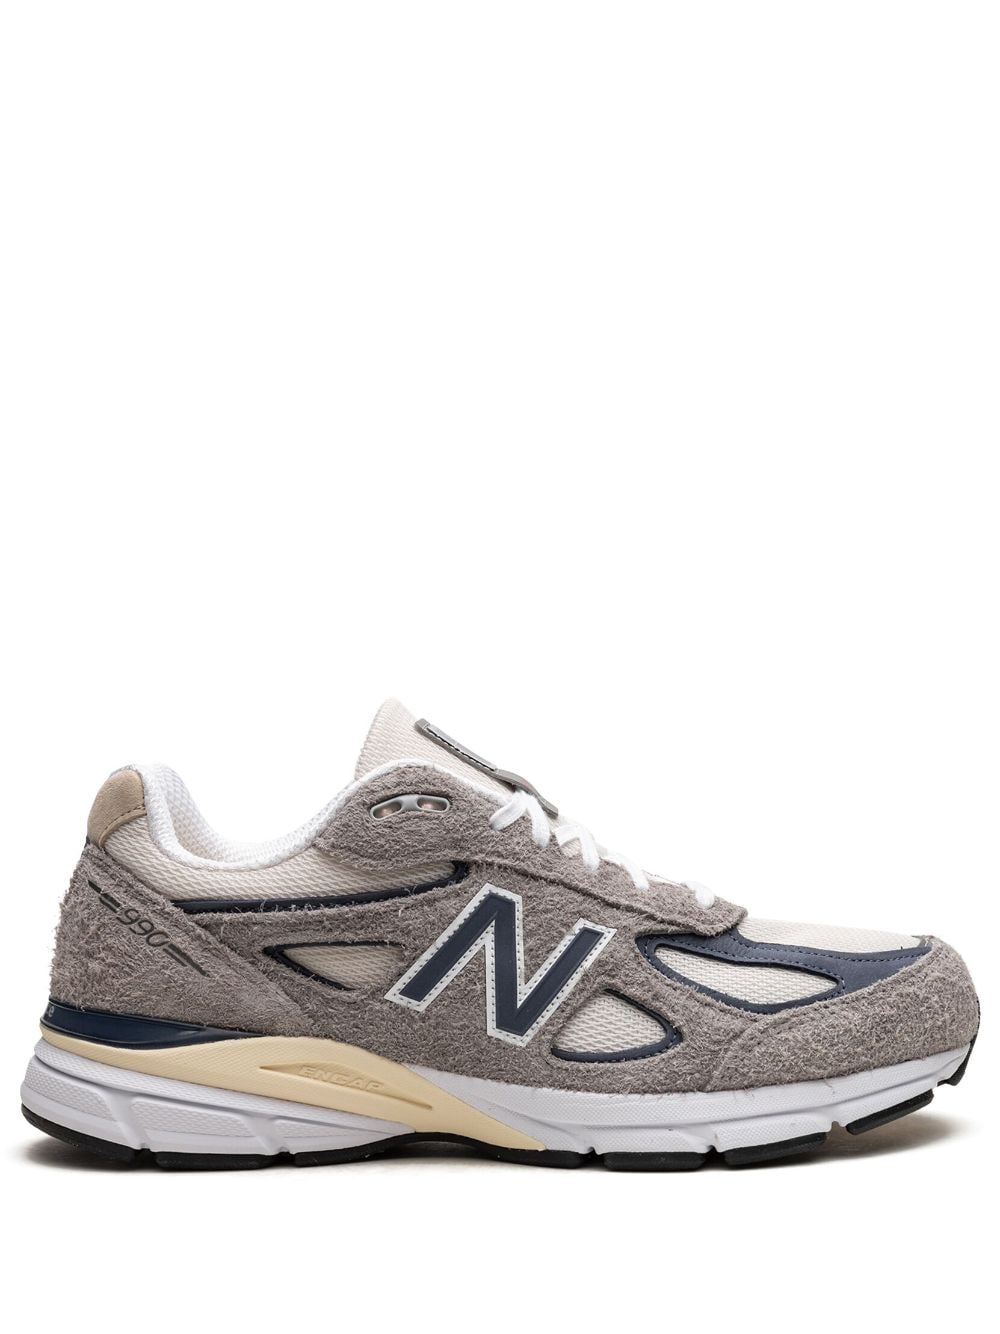 New Balance 990v4 "Made In USA - Grey/Navy" sneakers - Grijs